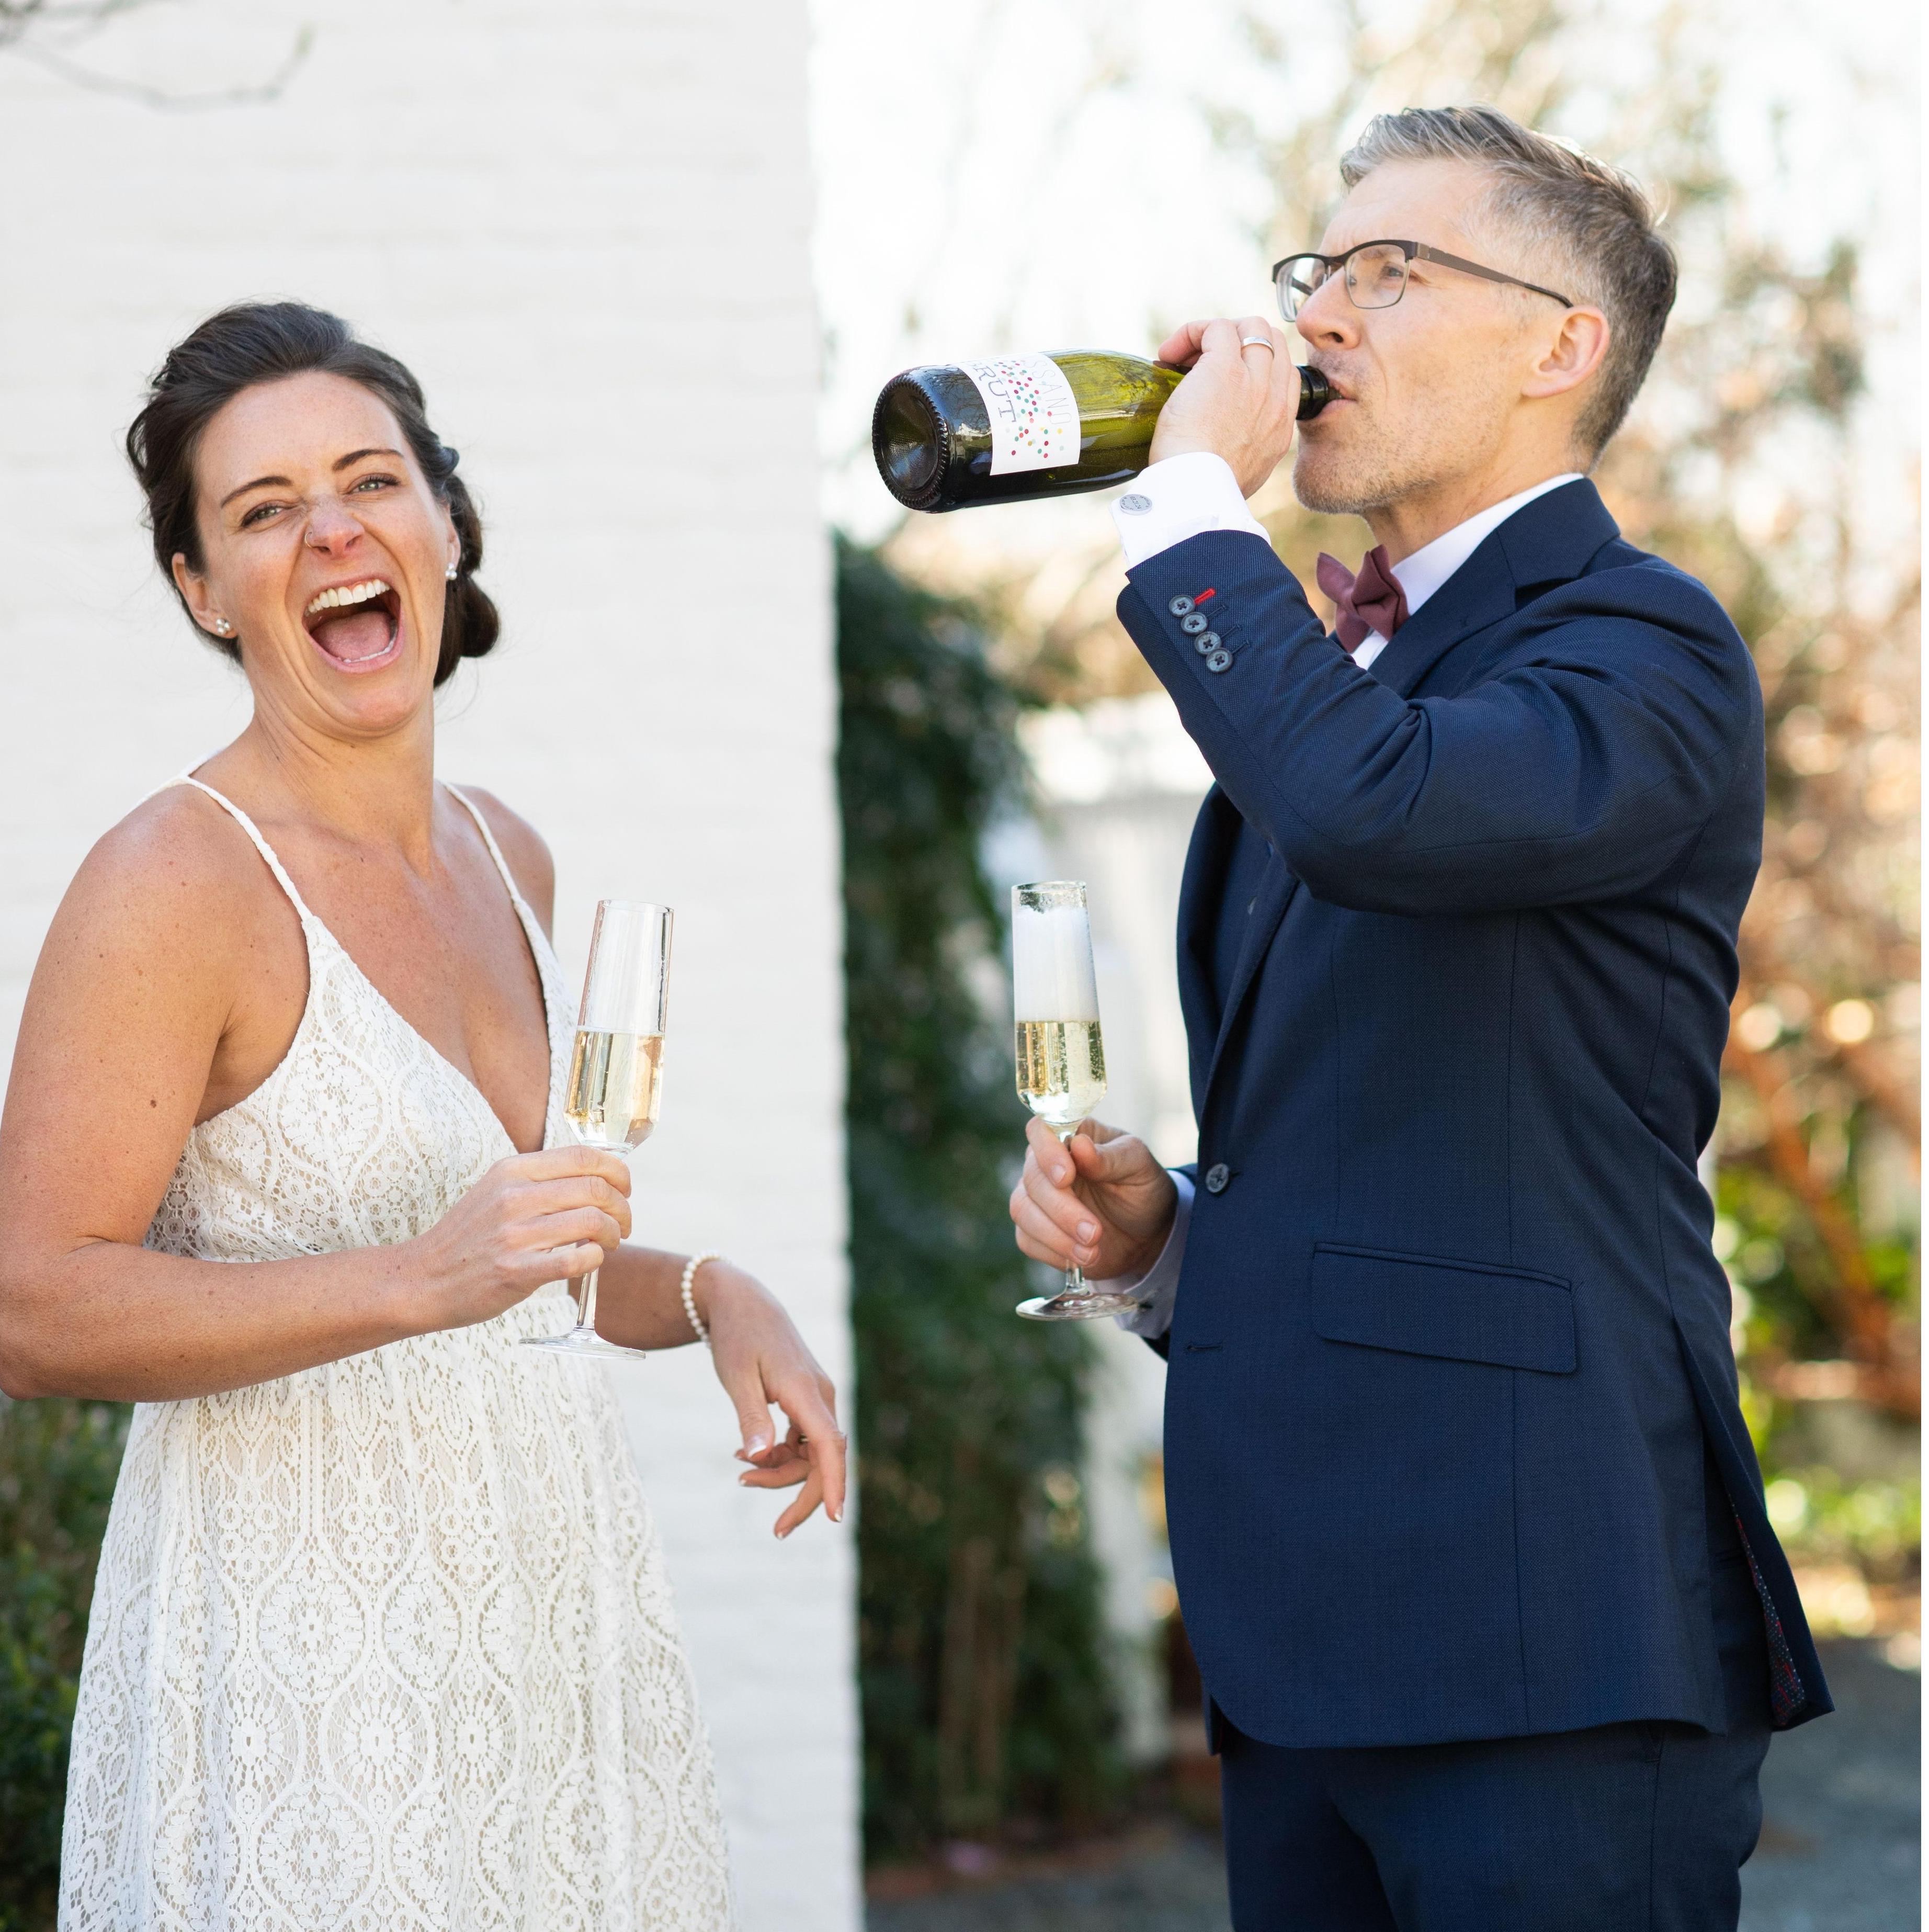 It wouldn't be our wedding without bubbles!